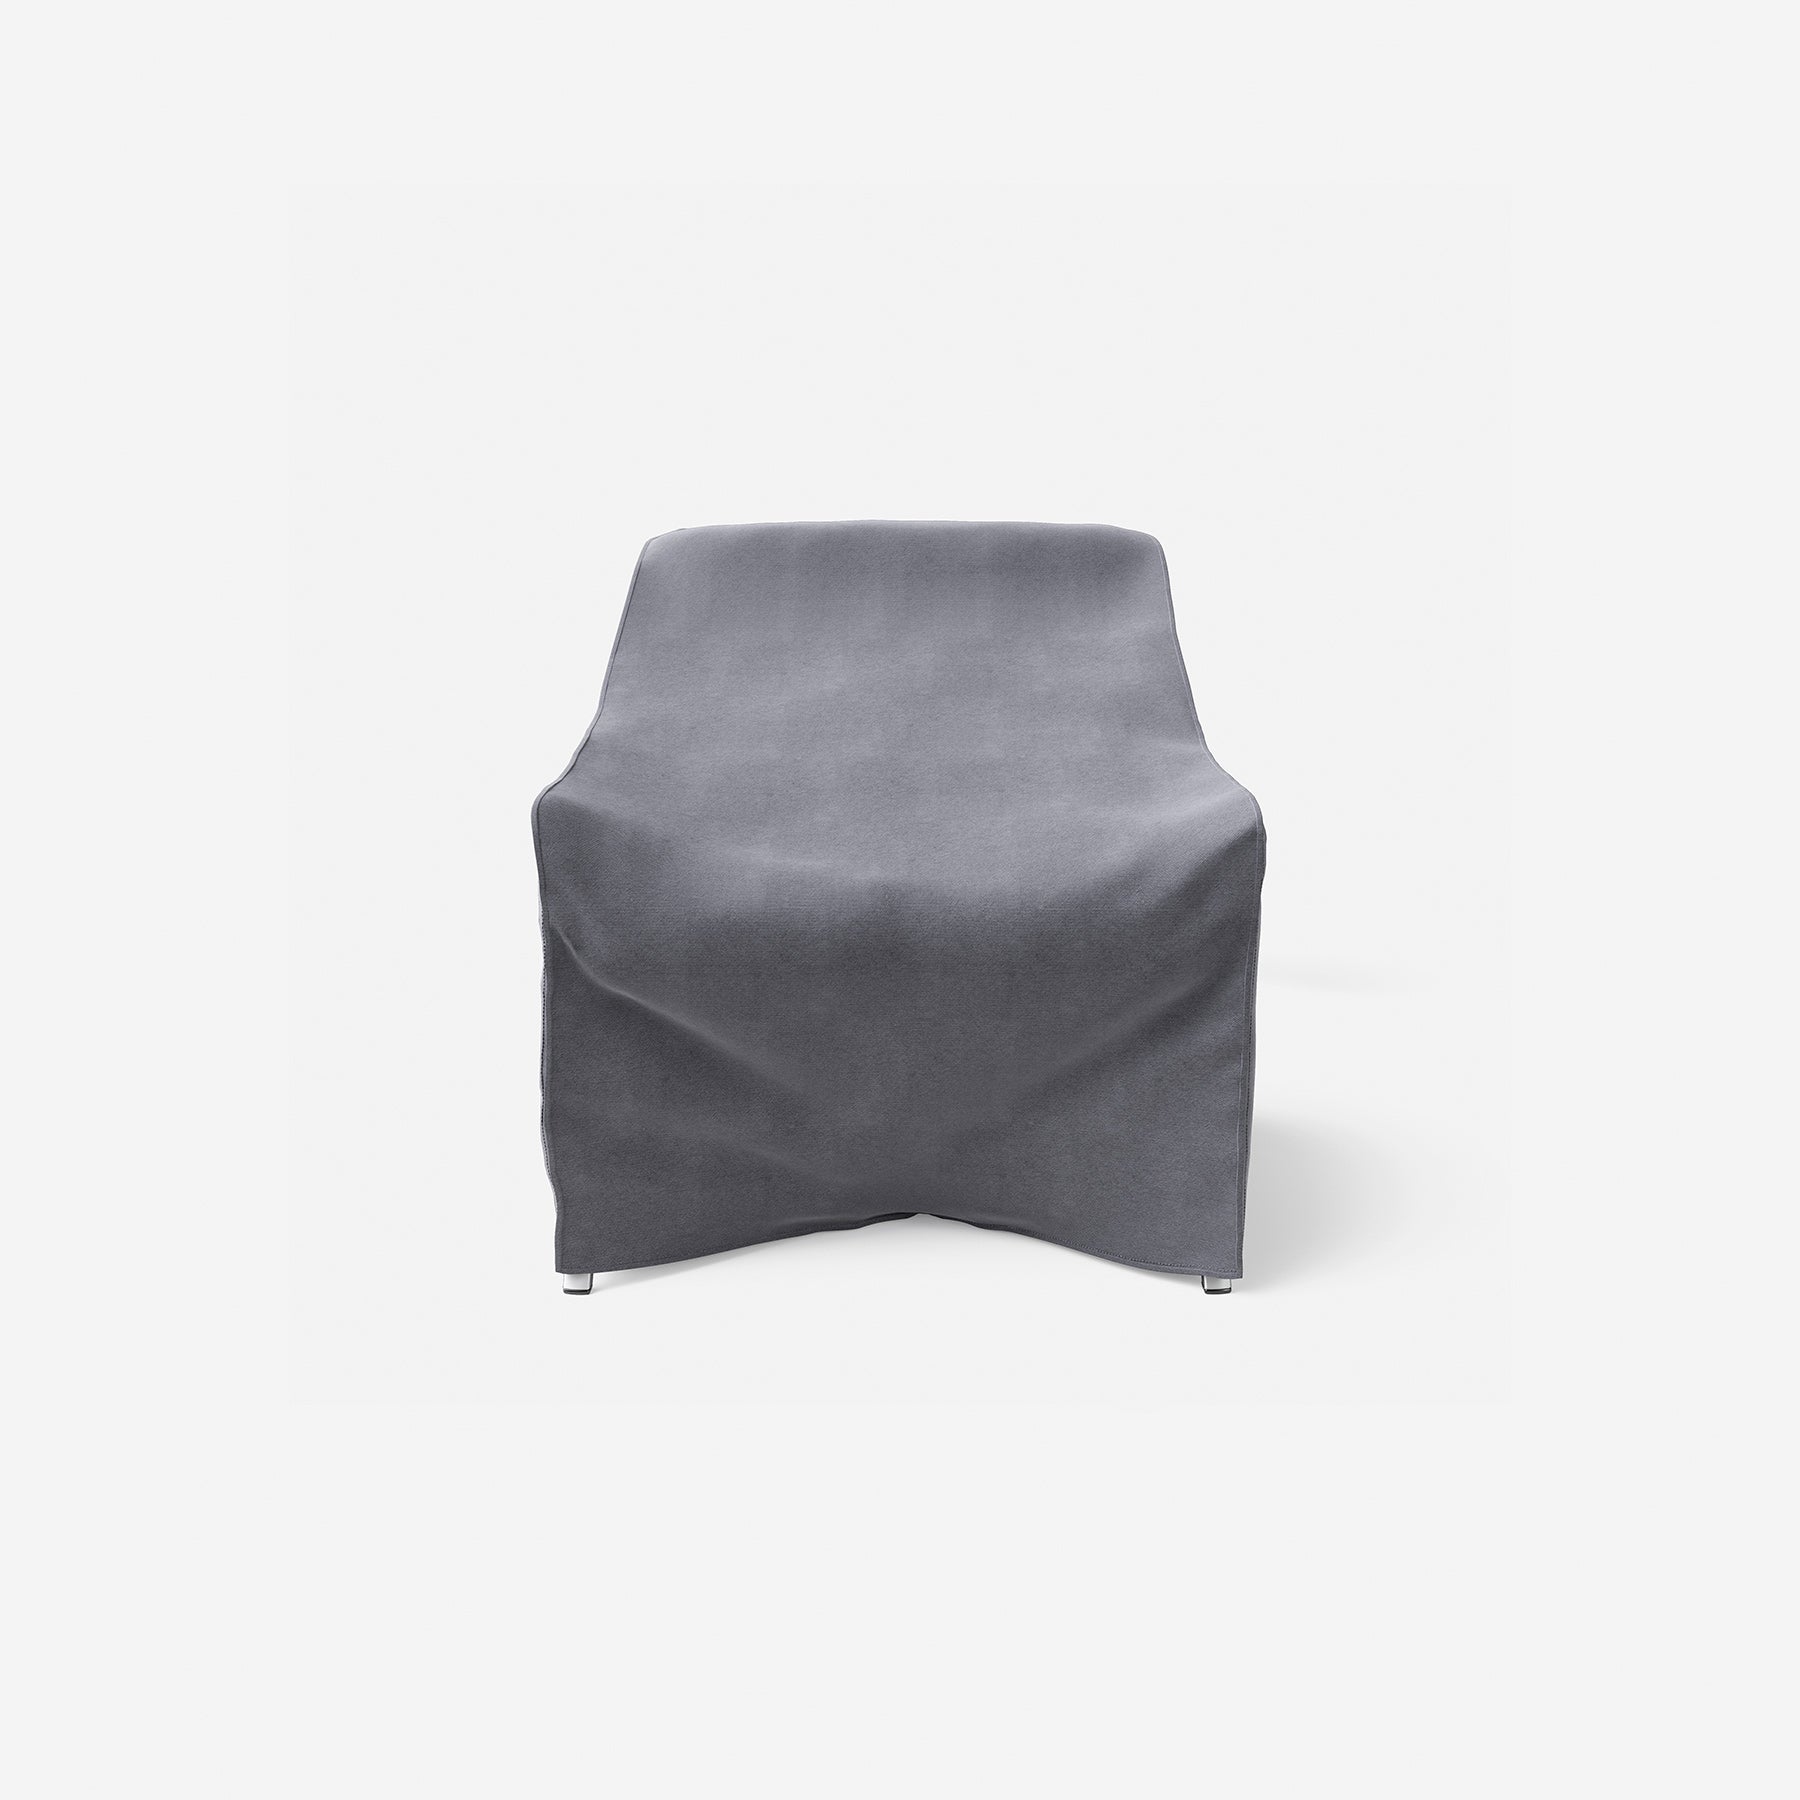 Vipp Open Air Lounge Chair Cover